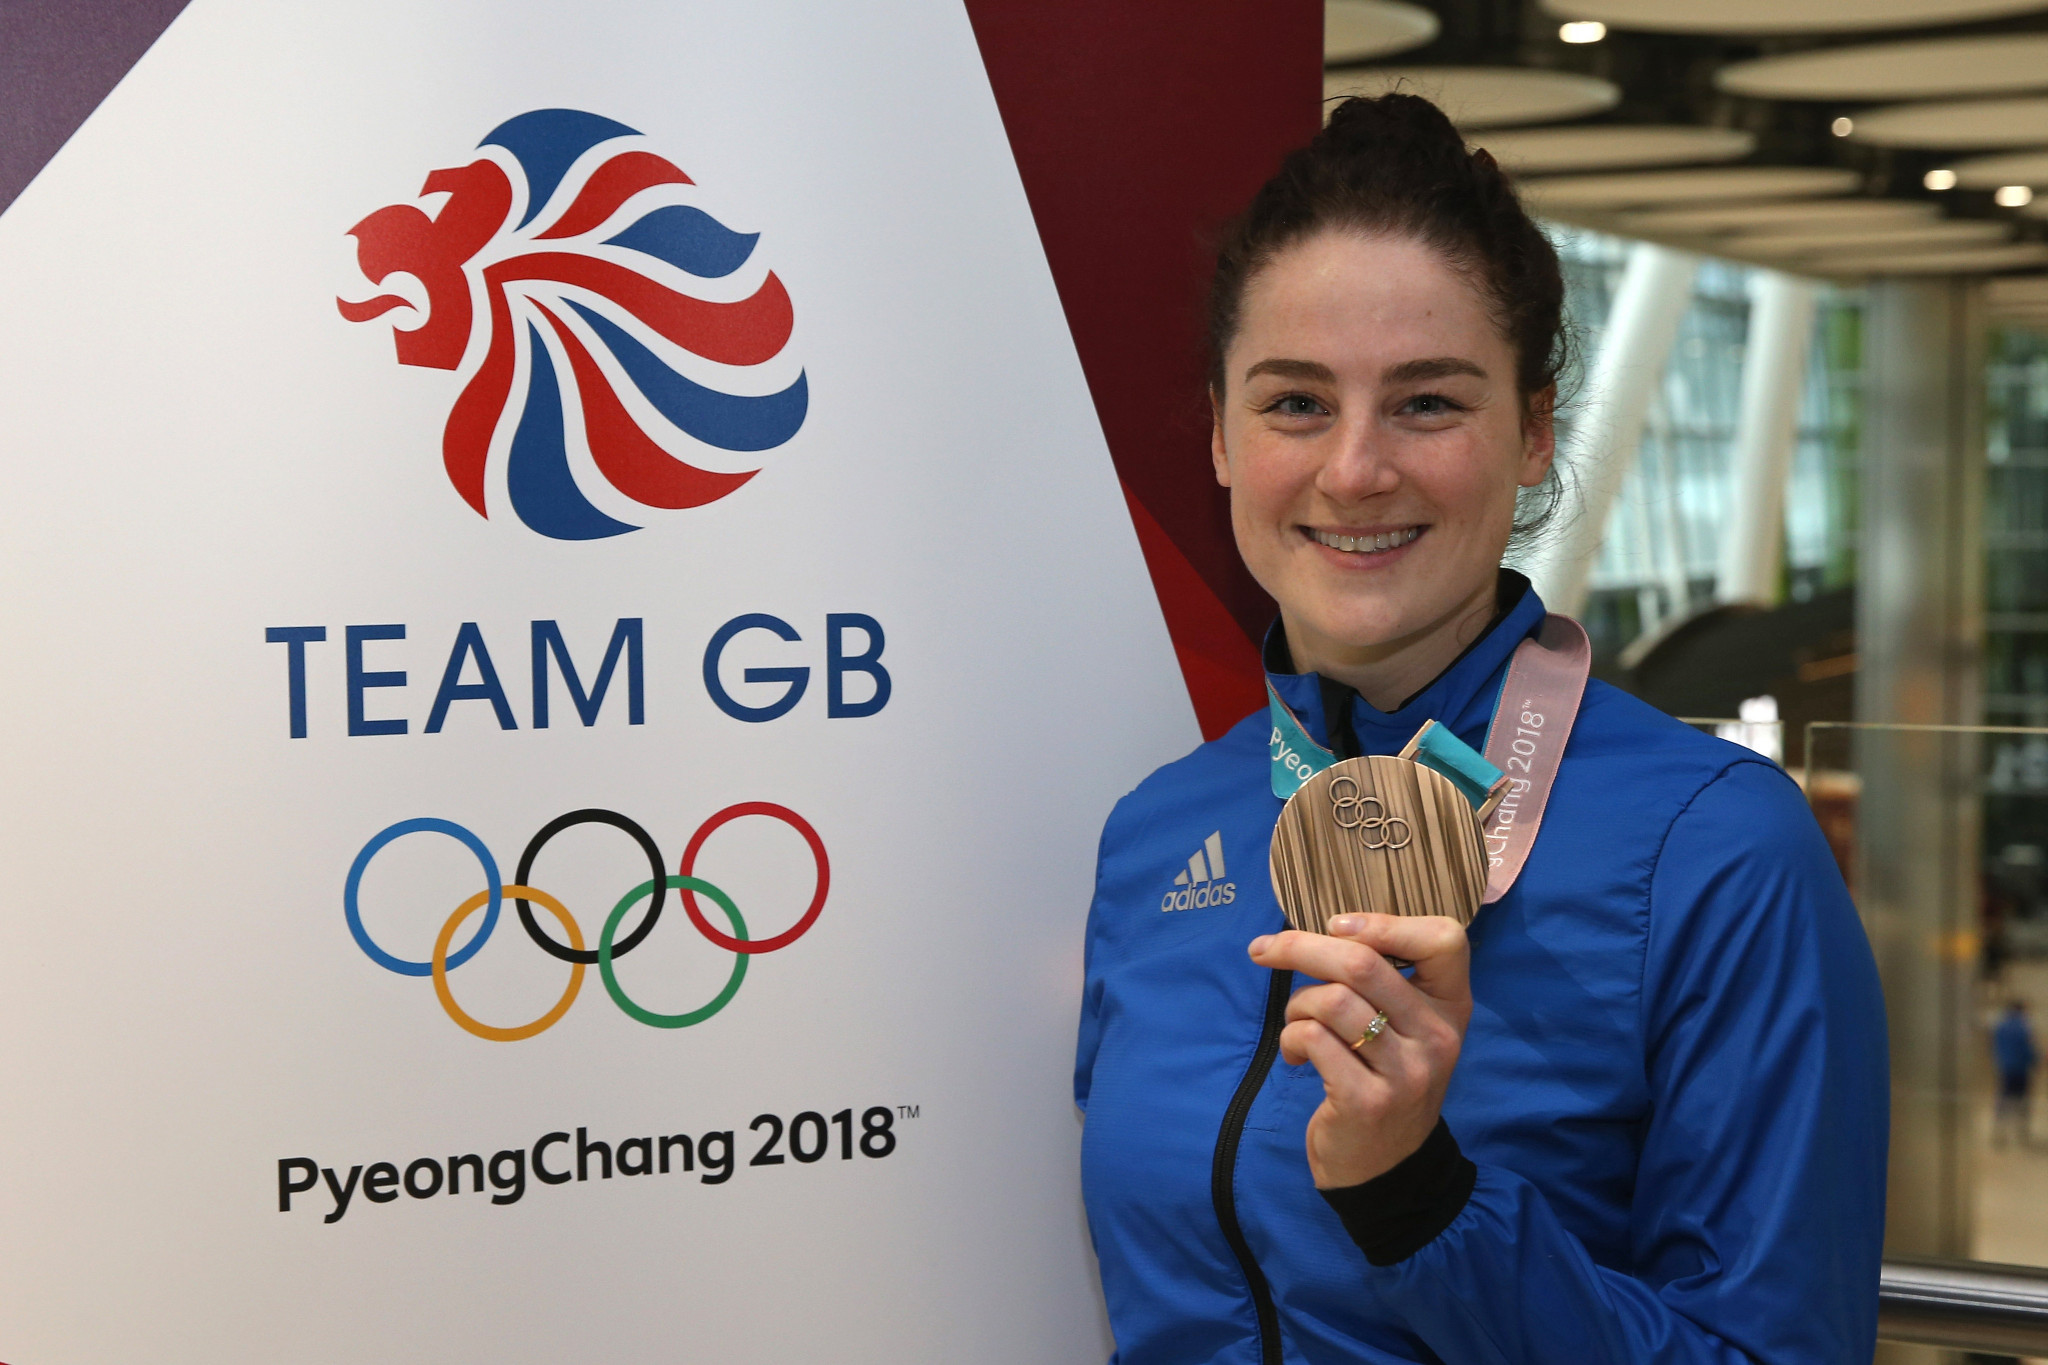 Laura Deas won a skeleton bronze medal at the Pyeongchang 2018 Winter Olympics ©Getty Images